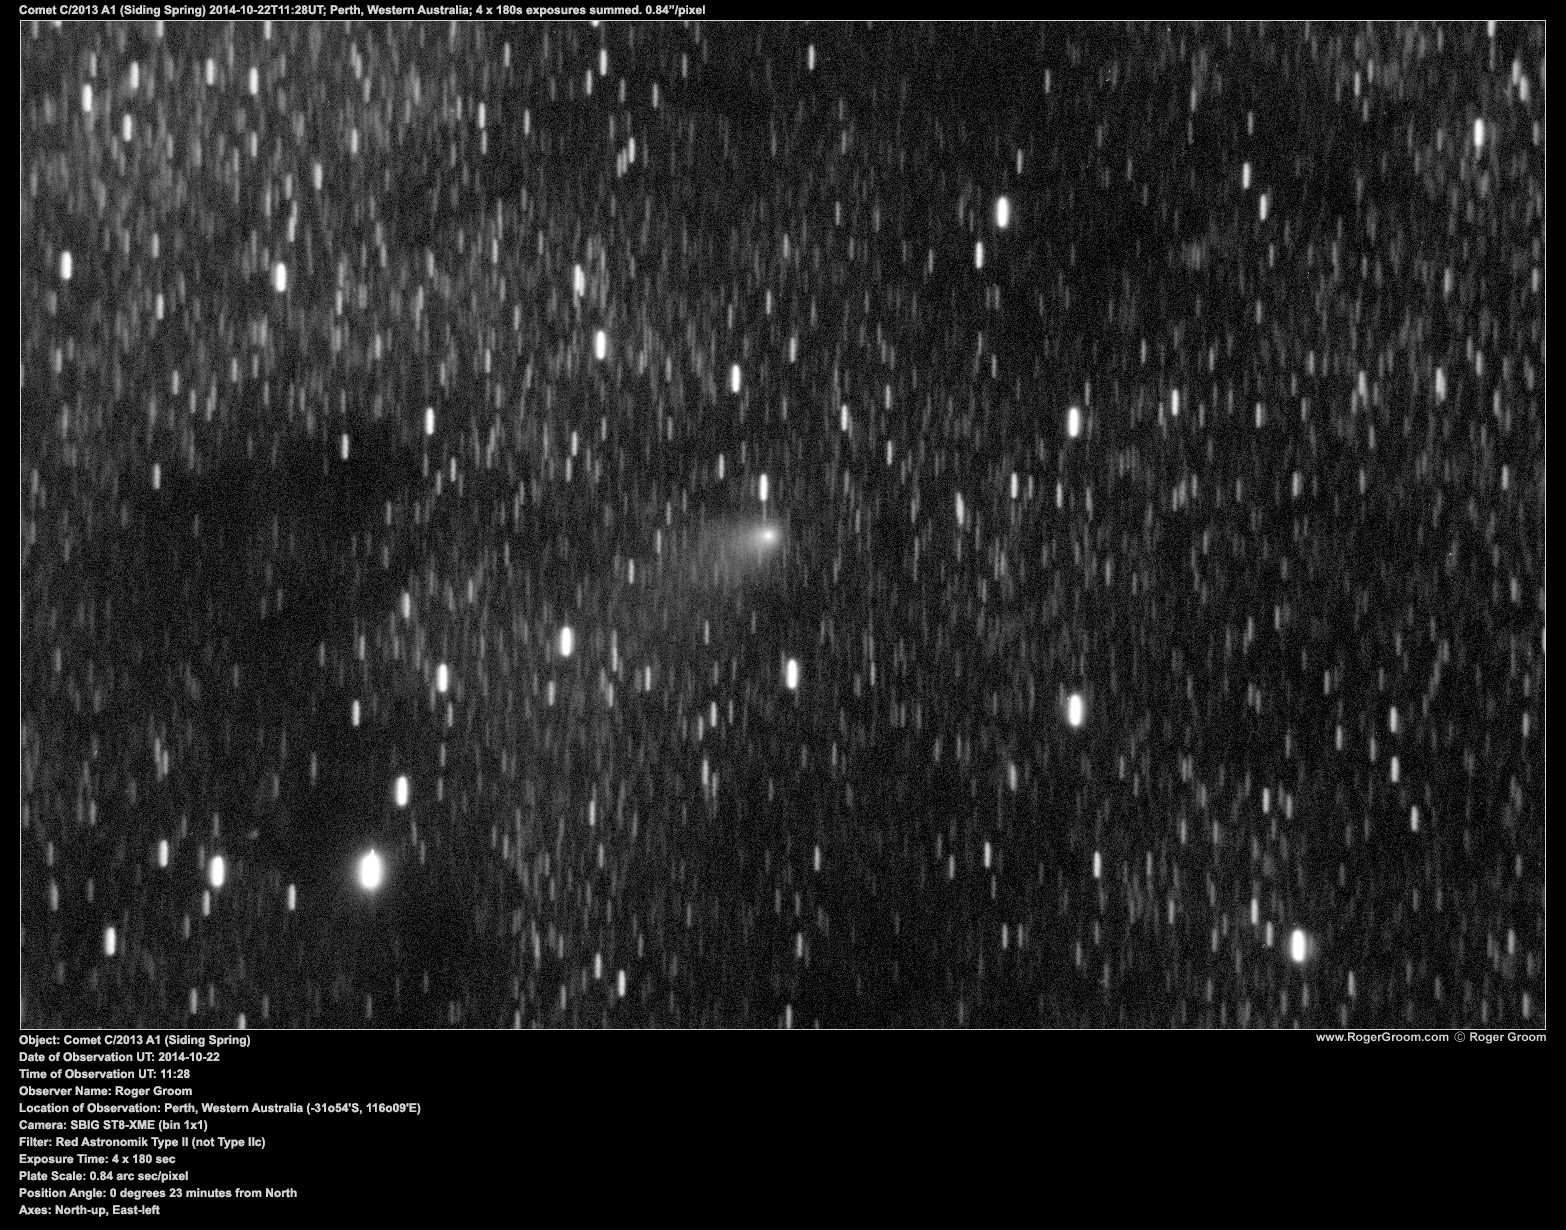 Object: Comet C/2013 A1 (Siding Spring) Date of Observation UT: 2014-10-22 Time of Observation UT: 11:28 Observer Name: Roger Groom Location of Observation: Perth, Western Australia (-31o54'S, 116o09'E) Camera: SBIG ST8-XME (bin 1x1) Filter: Red Astronomik Type II (not Type IIc) Exposure Time: 4 x 180 sec Plate Scale: 0.84 arc sec/pixel Position Angle: 0 degrees 23 minutes from North Axes: North-up, East-left Likely impacted by trees towards the end of exposures.